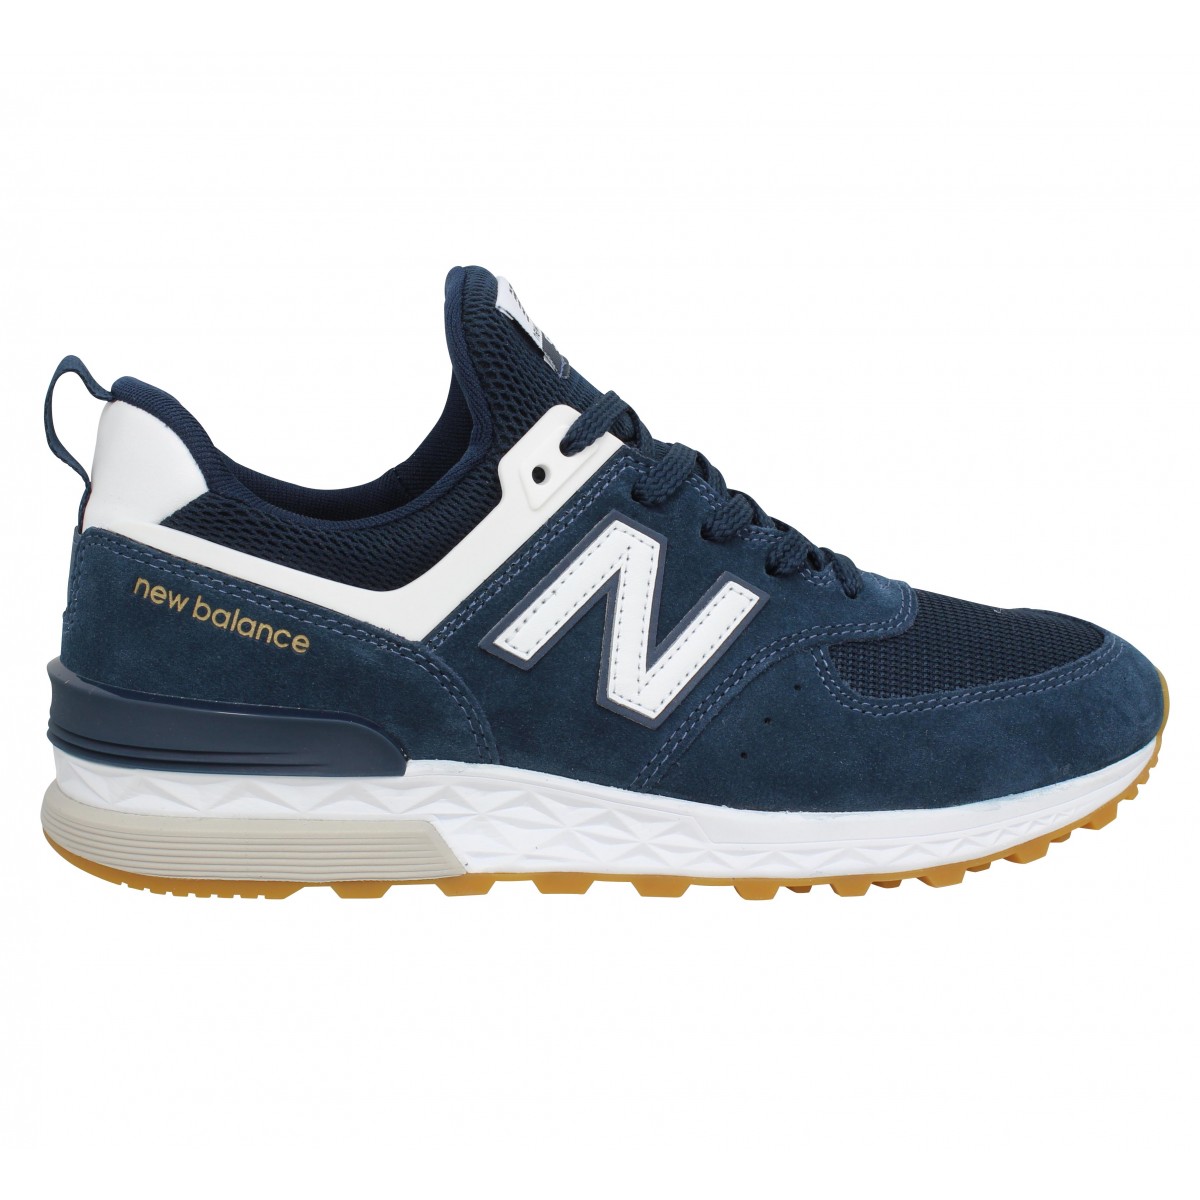 Chaussures New balance 574 sport velours homme marine homme ...